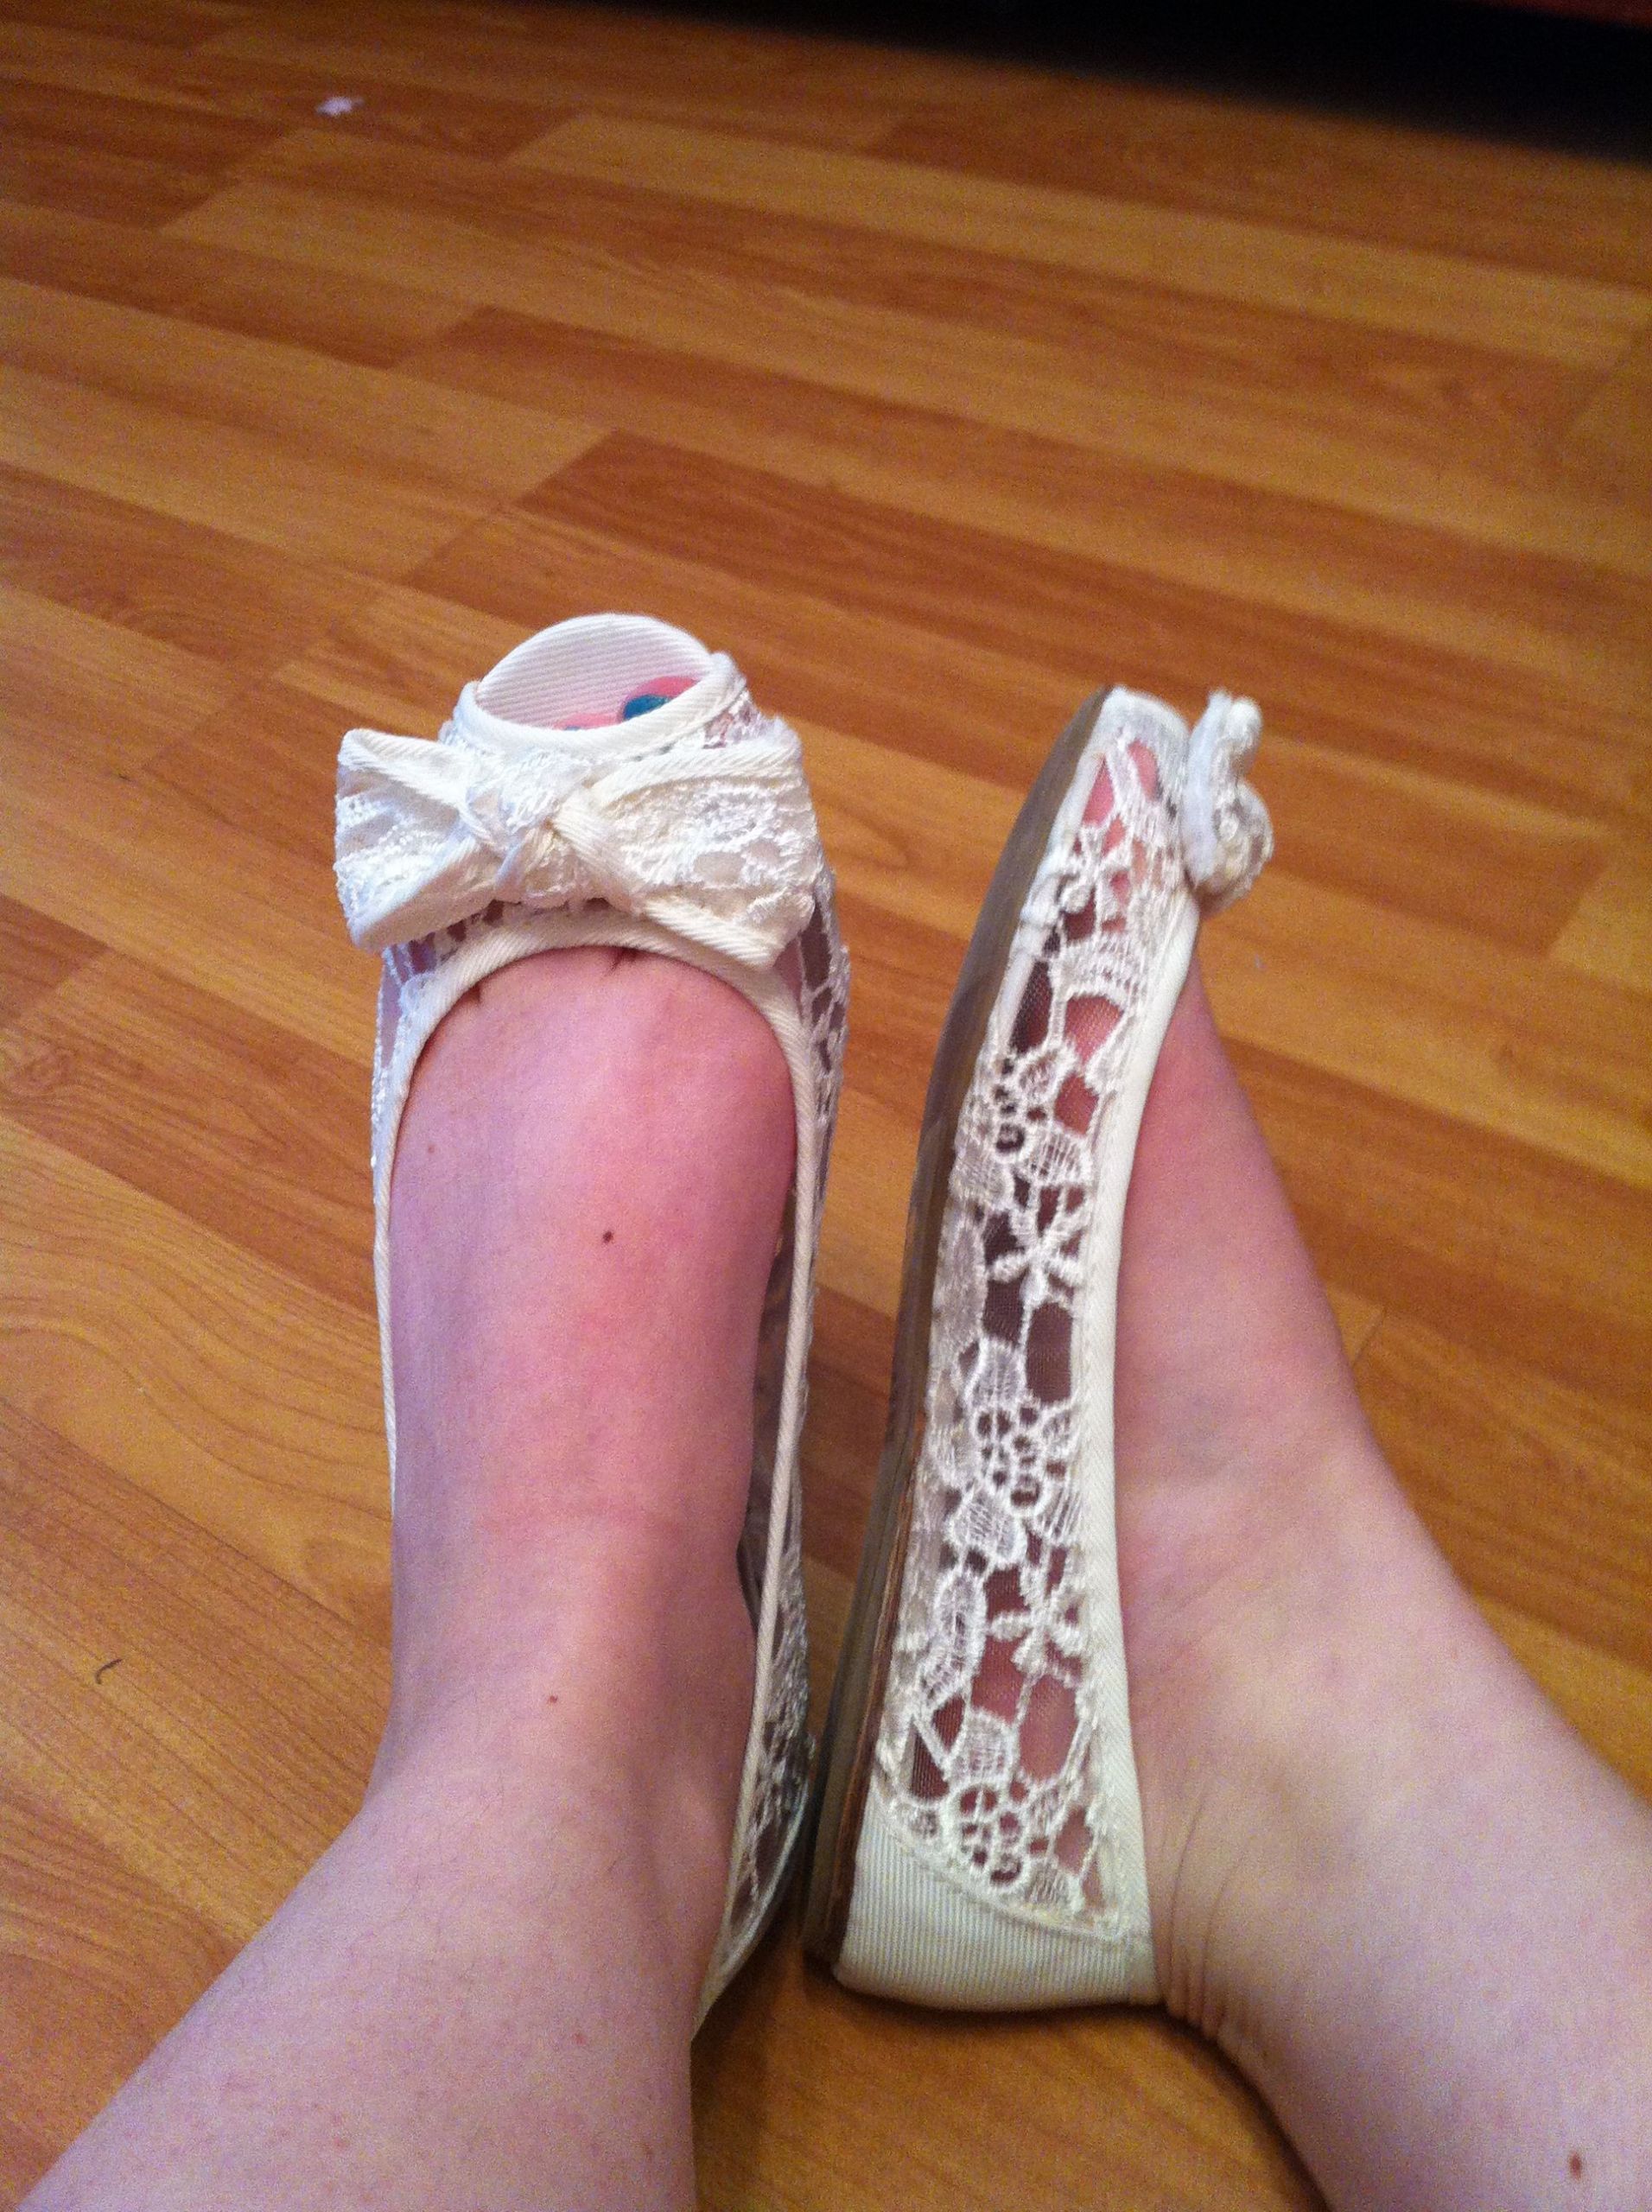 Sears Wedding Shoes
 Wedding flats "Lacy" by trend report from Sears $20